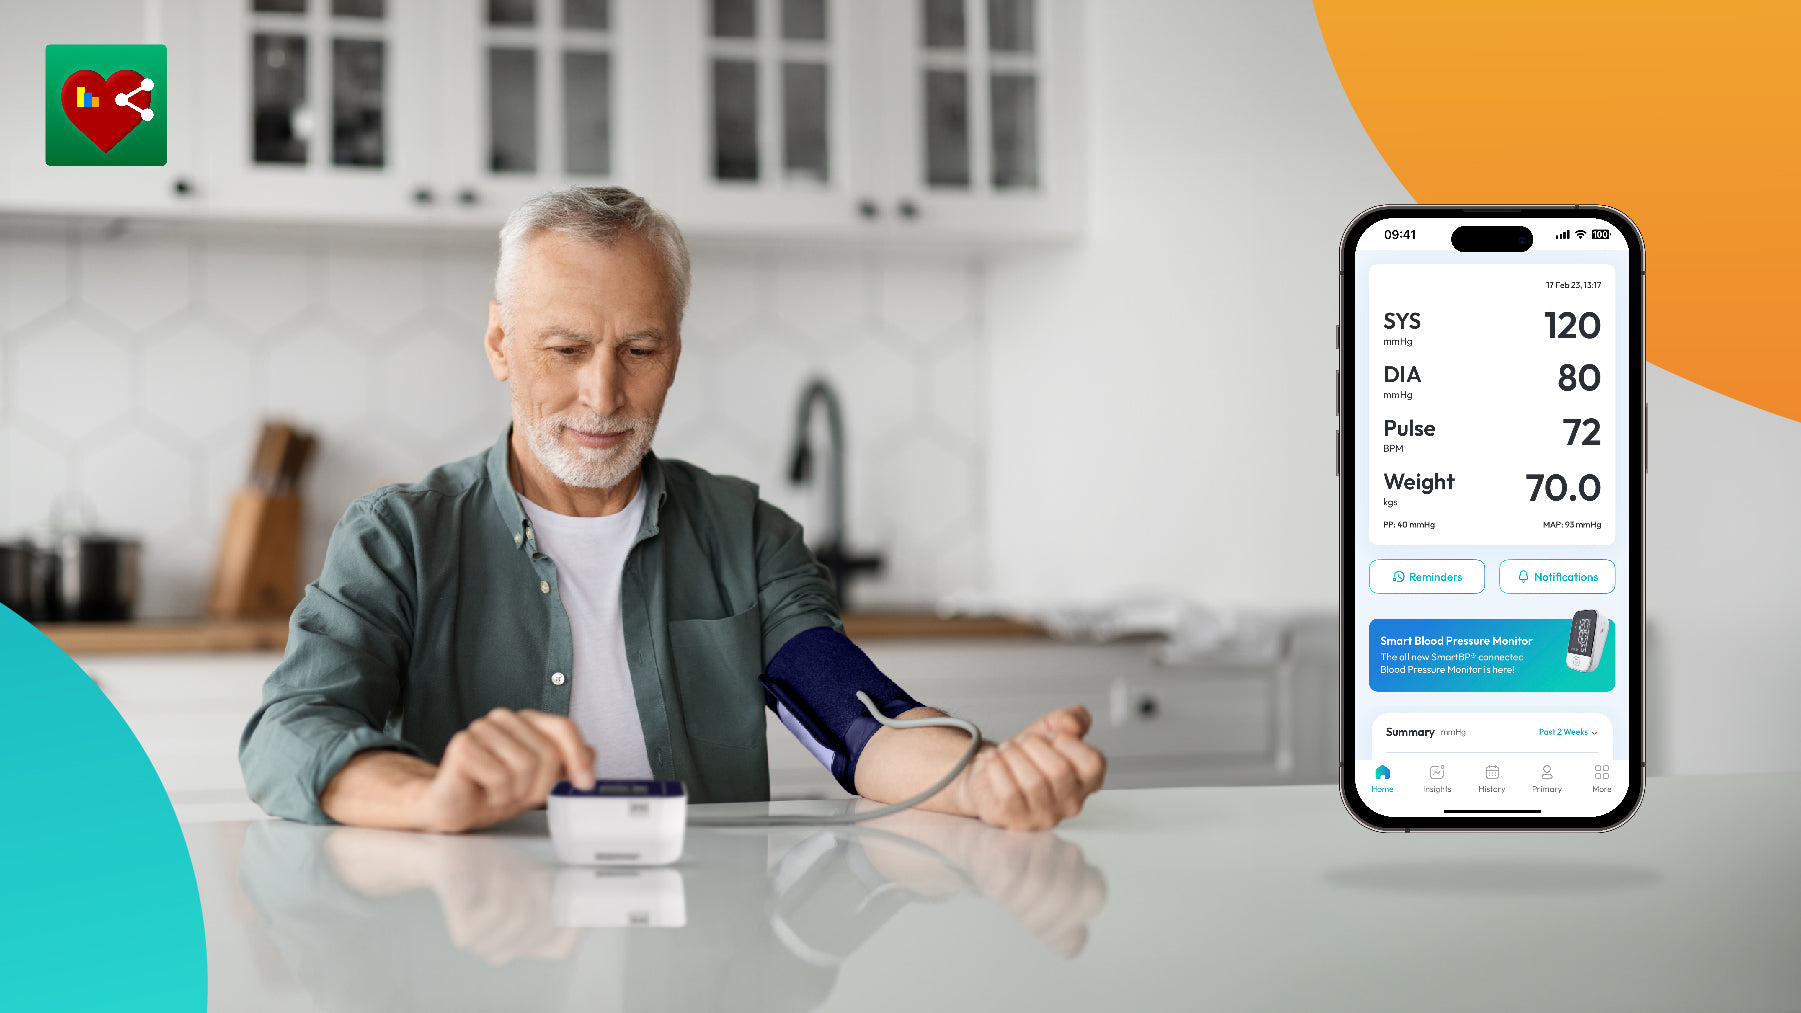 Best bluetooth and wireless smartphone connected blood pressure cuffs